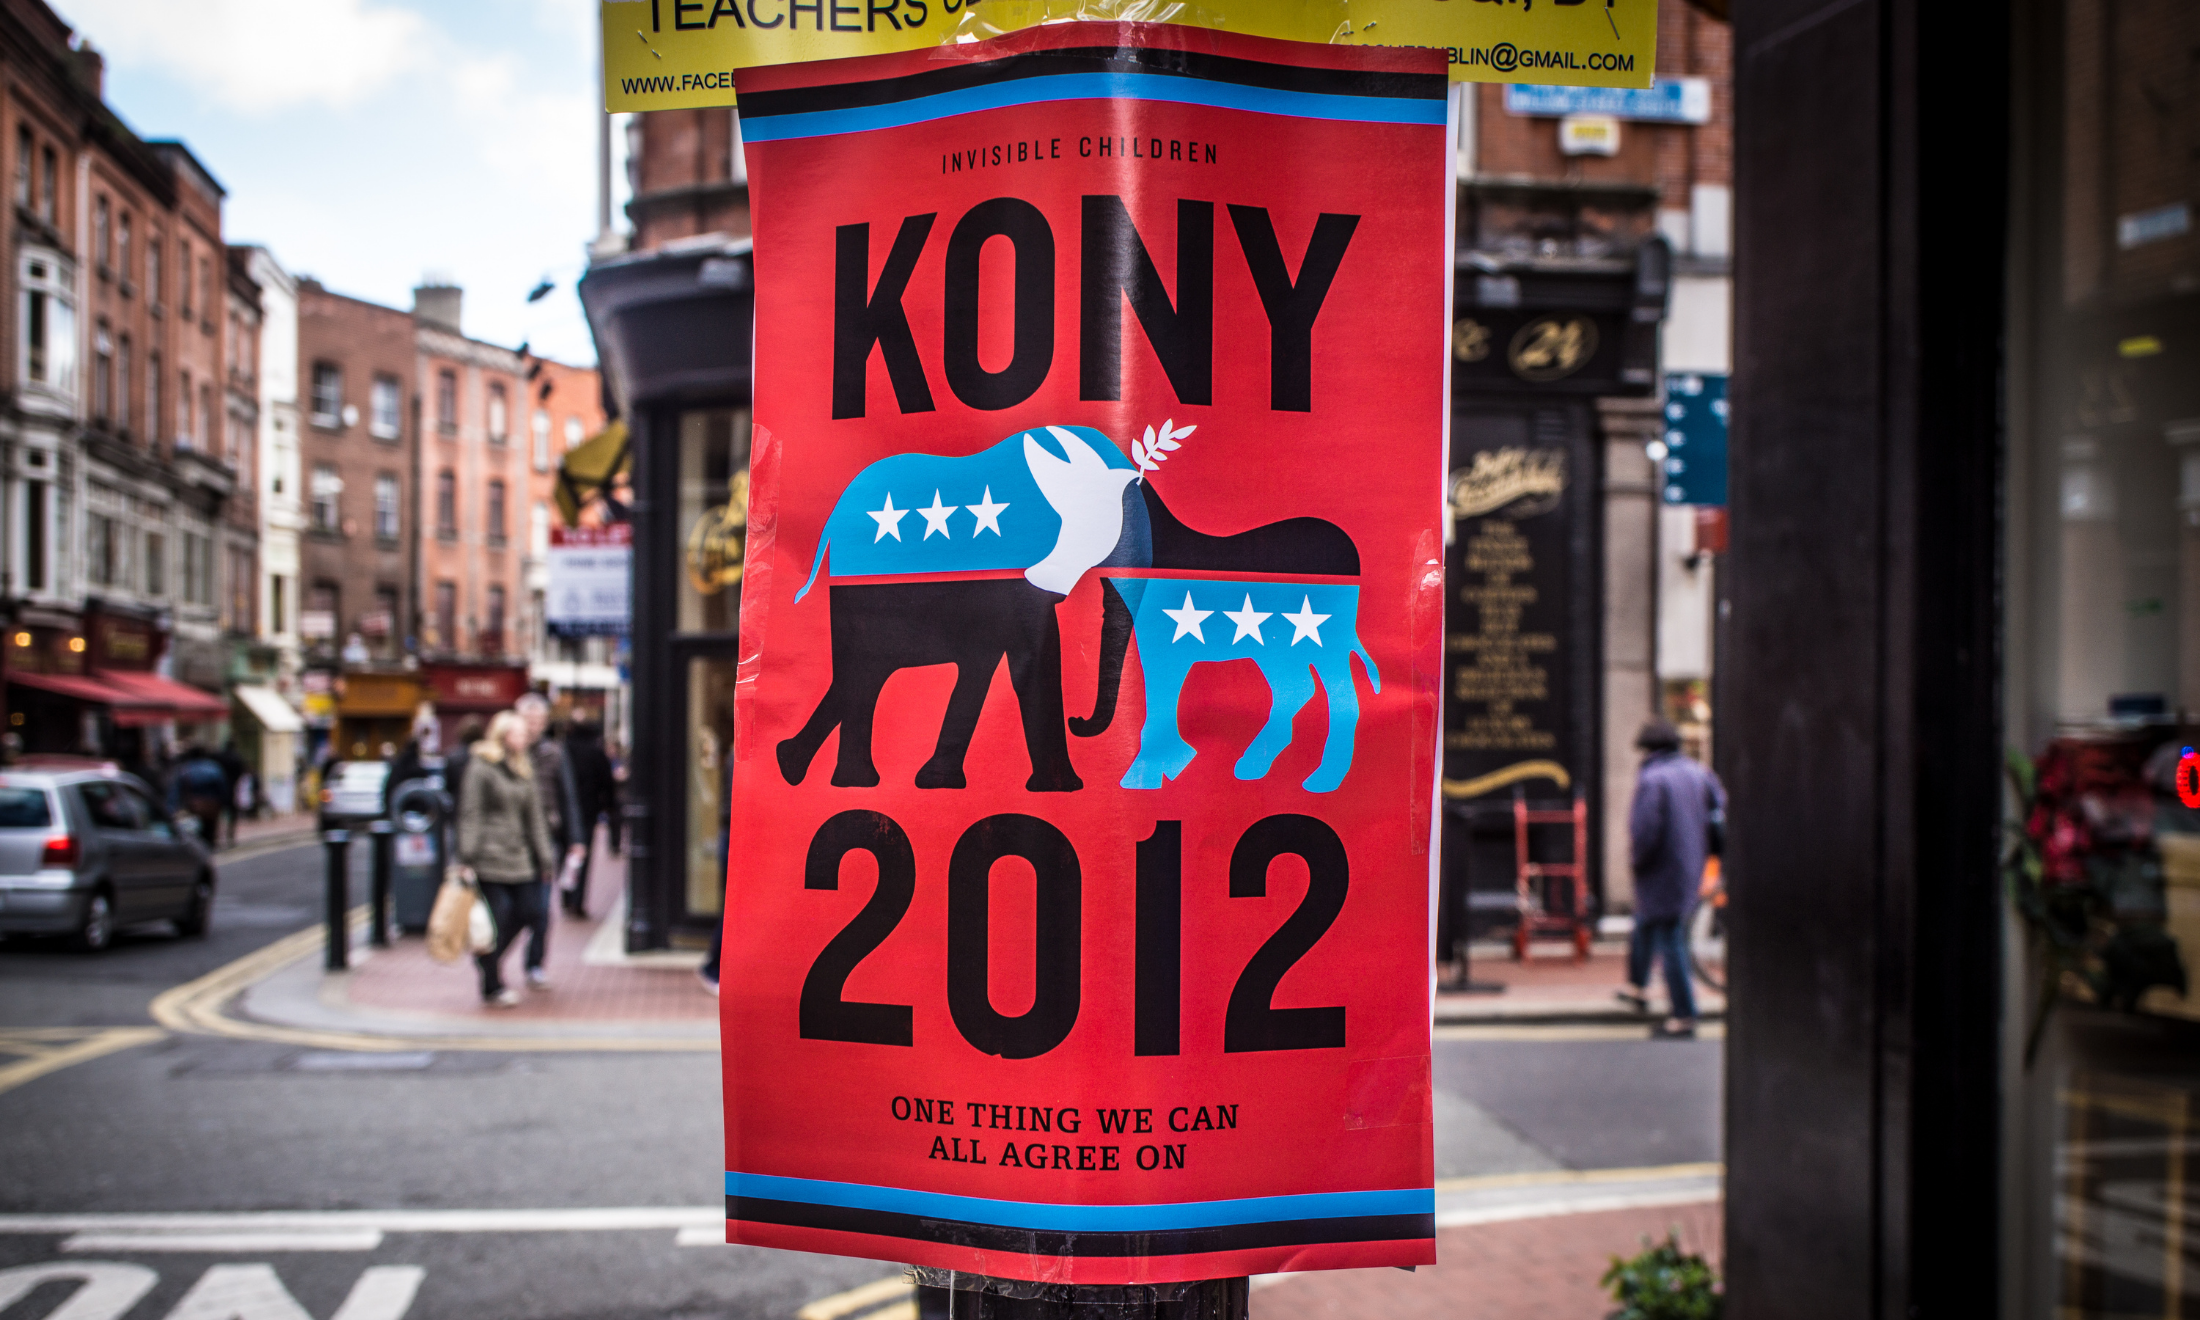 #StopKony: 10 years on, how did a controversial campaign shape online activism?